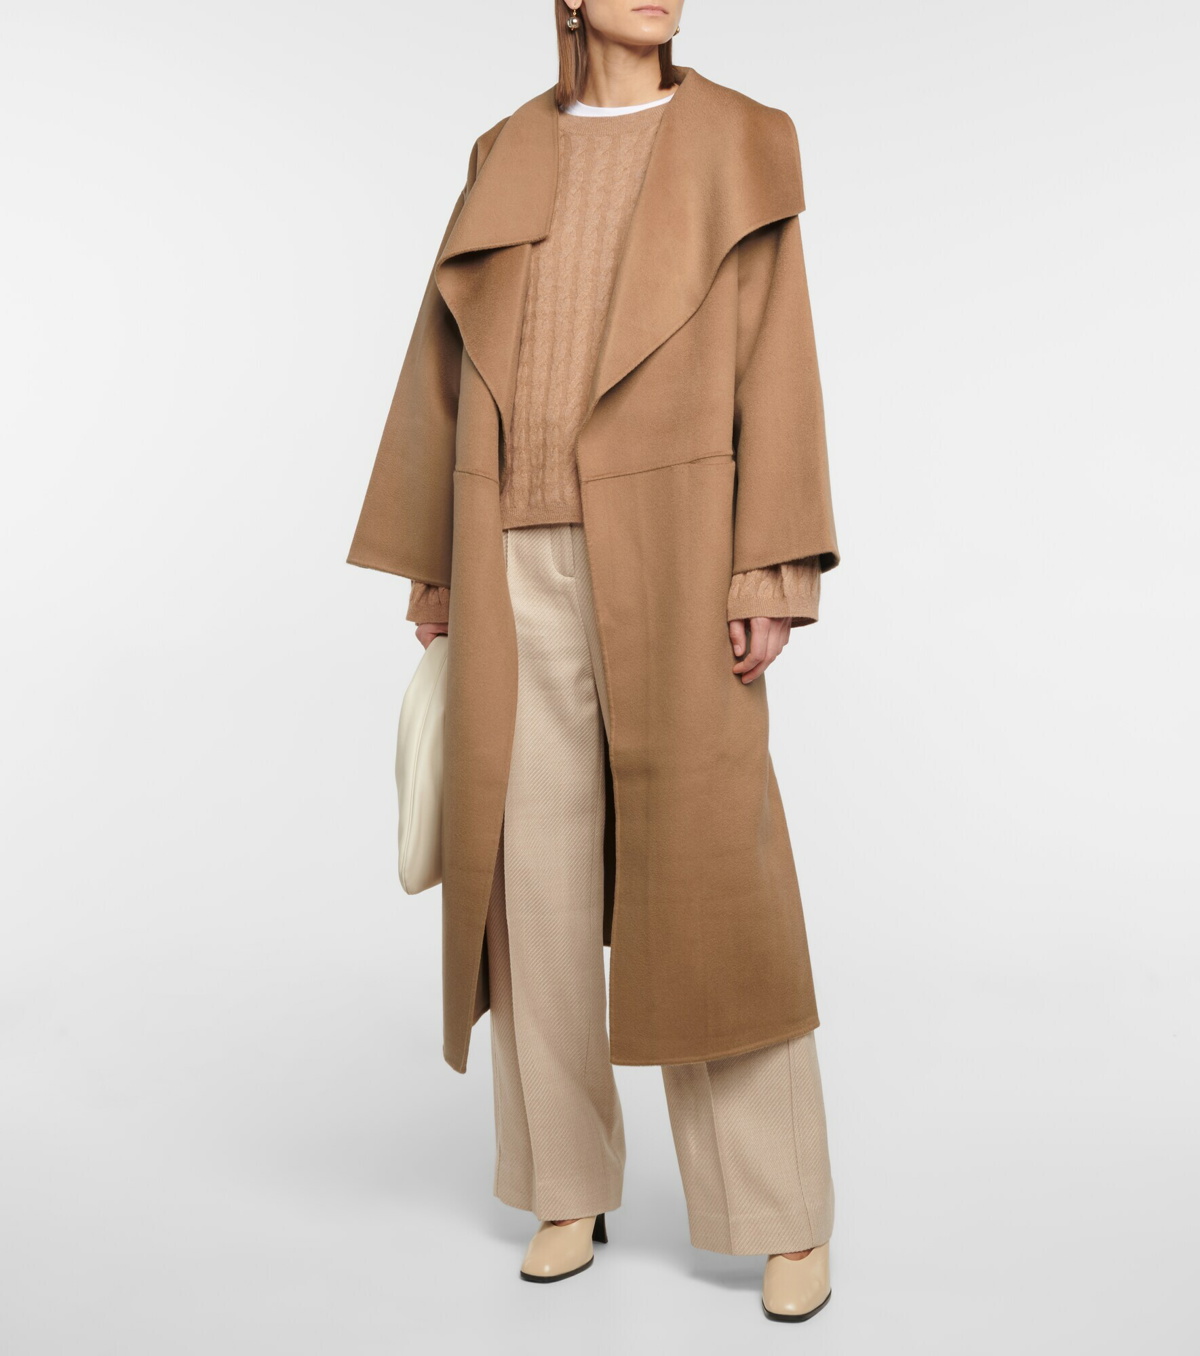 Toteme - Signature wool and cashmere coat Toteme